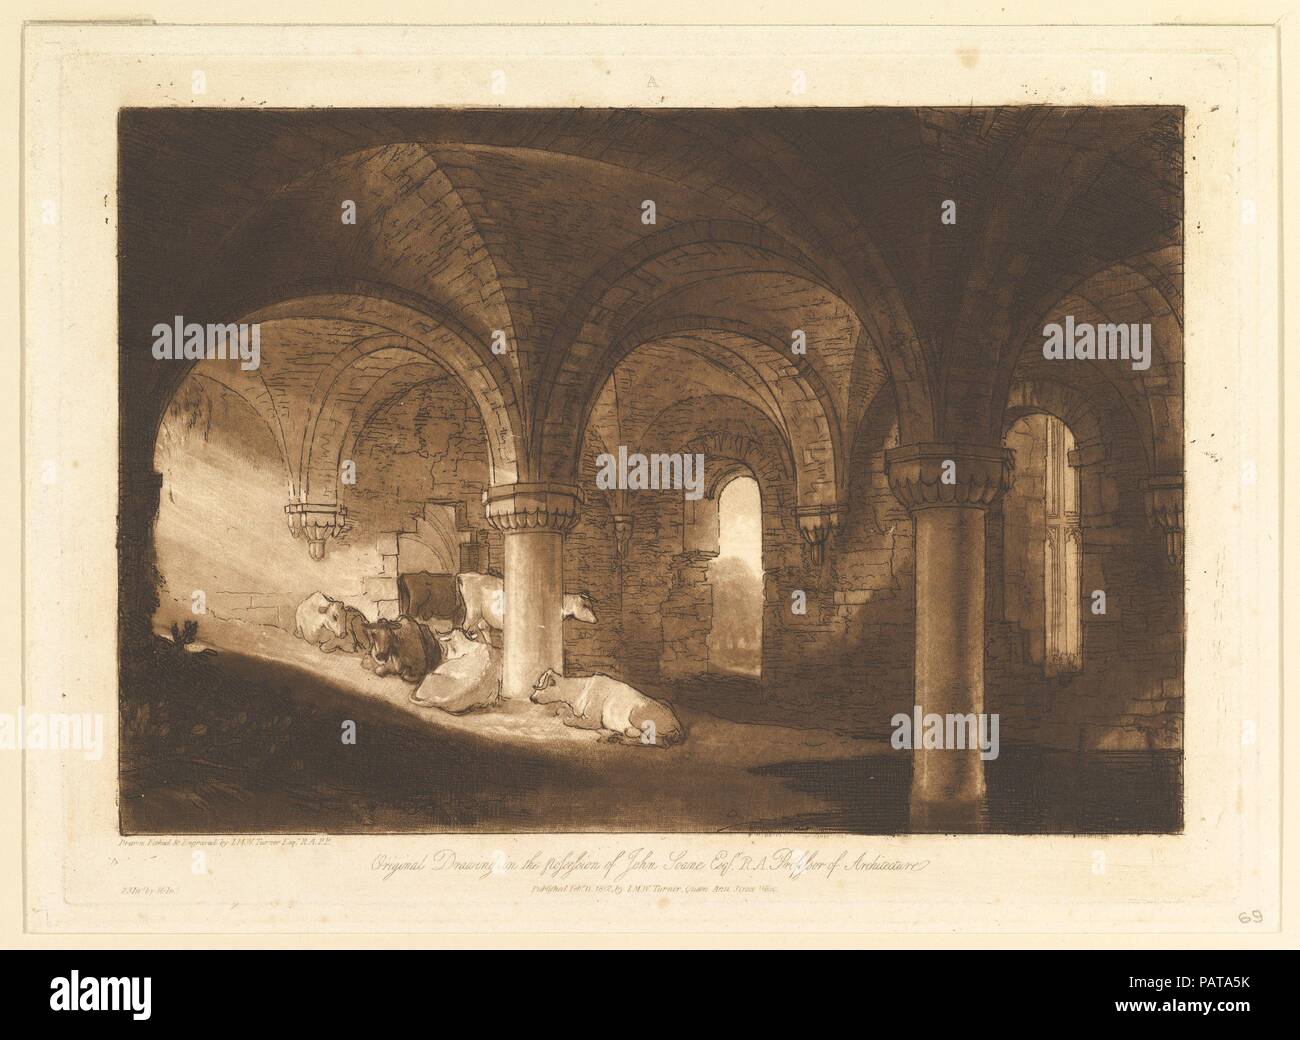 Crypt of Kirkstall Abbey (Liber Studiorum, part VIII, plate 39). Artist and publisher: Joseph Mallord William Turner (British, London 1775-1851 London). Dimensions: plate: 8 1/4 x 11 1/2 in. (21 x 29.1 cm). Date: February 11, 1812.  Turner distilled his ideas about landscape In 'Liber Studiorum' (Latin for Book of Studies), a series of seventy prints plus a frontispiece published between 1807 and 1819. To establish the compositions, he made brown watercolor drawings, then etched outlines onto copper plates. This is one of the few instances where he also developed the layers of tone, using aqua Stock Photo